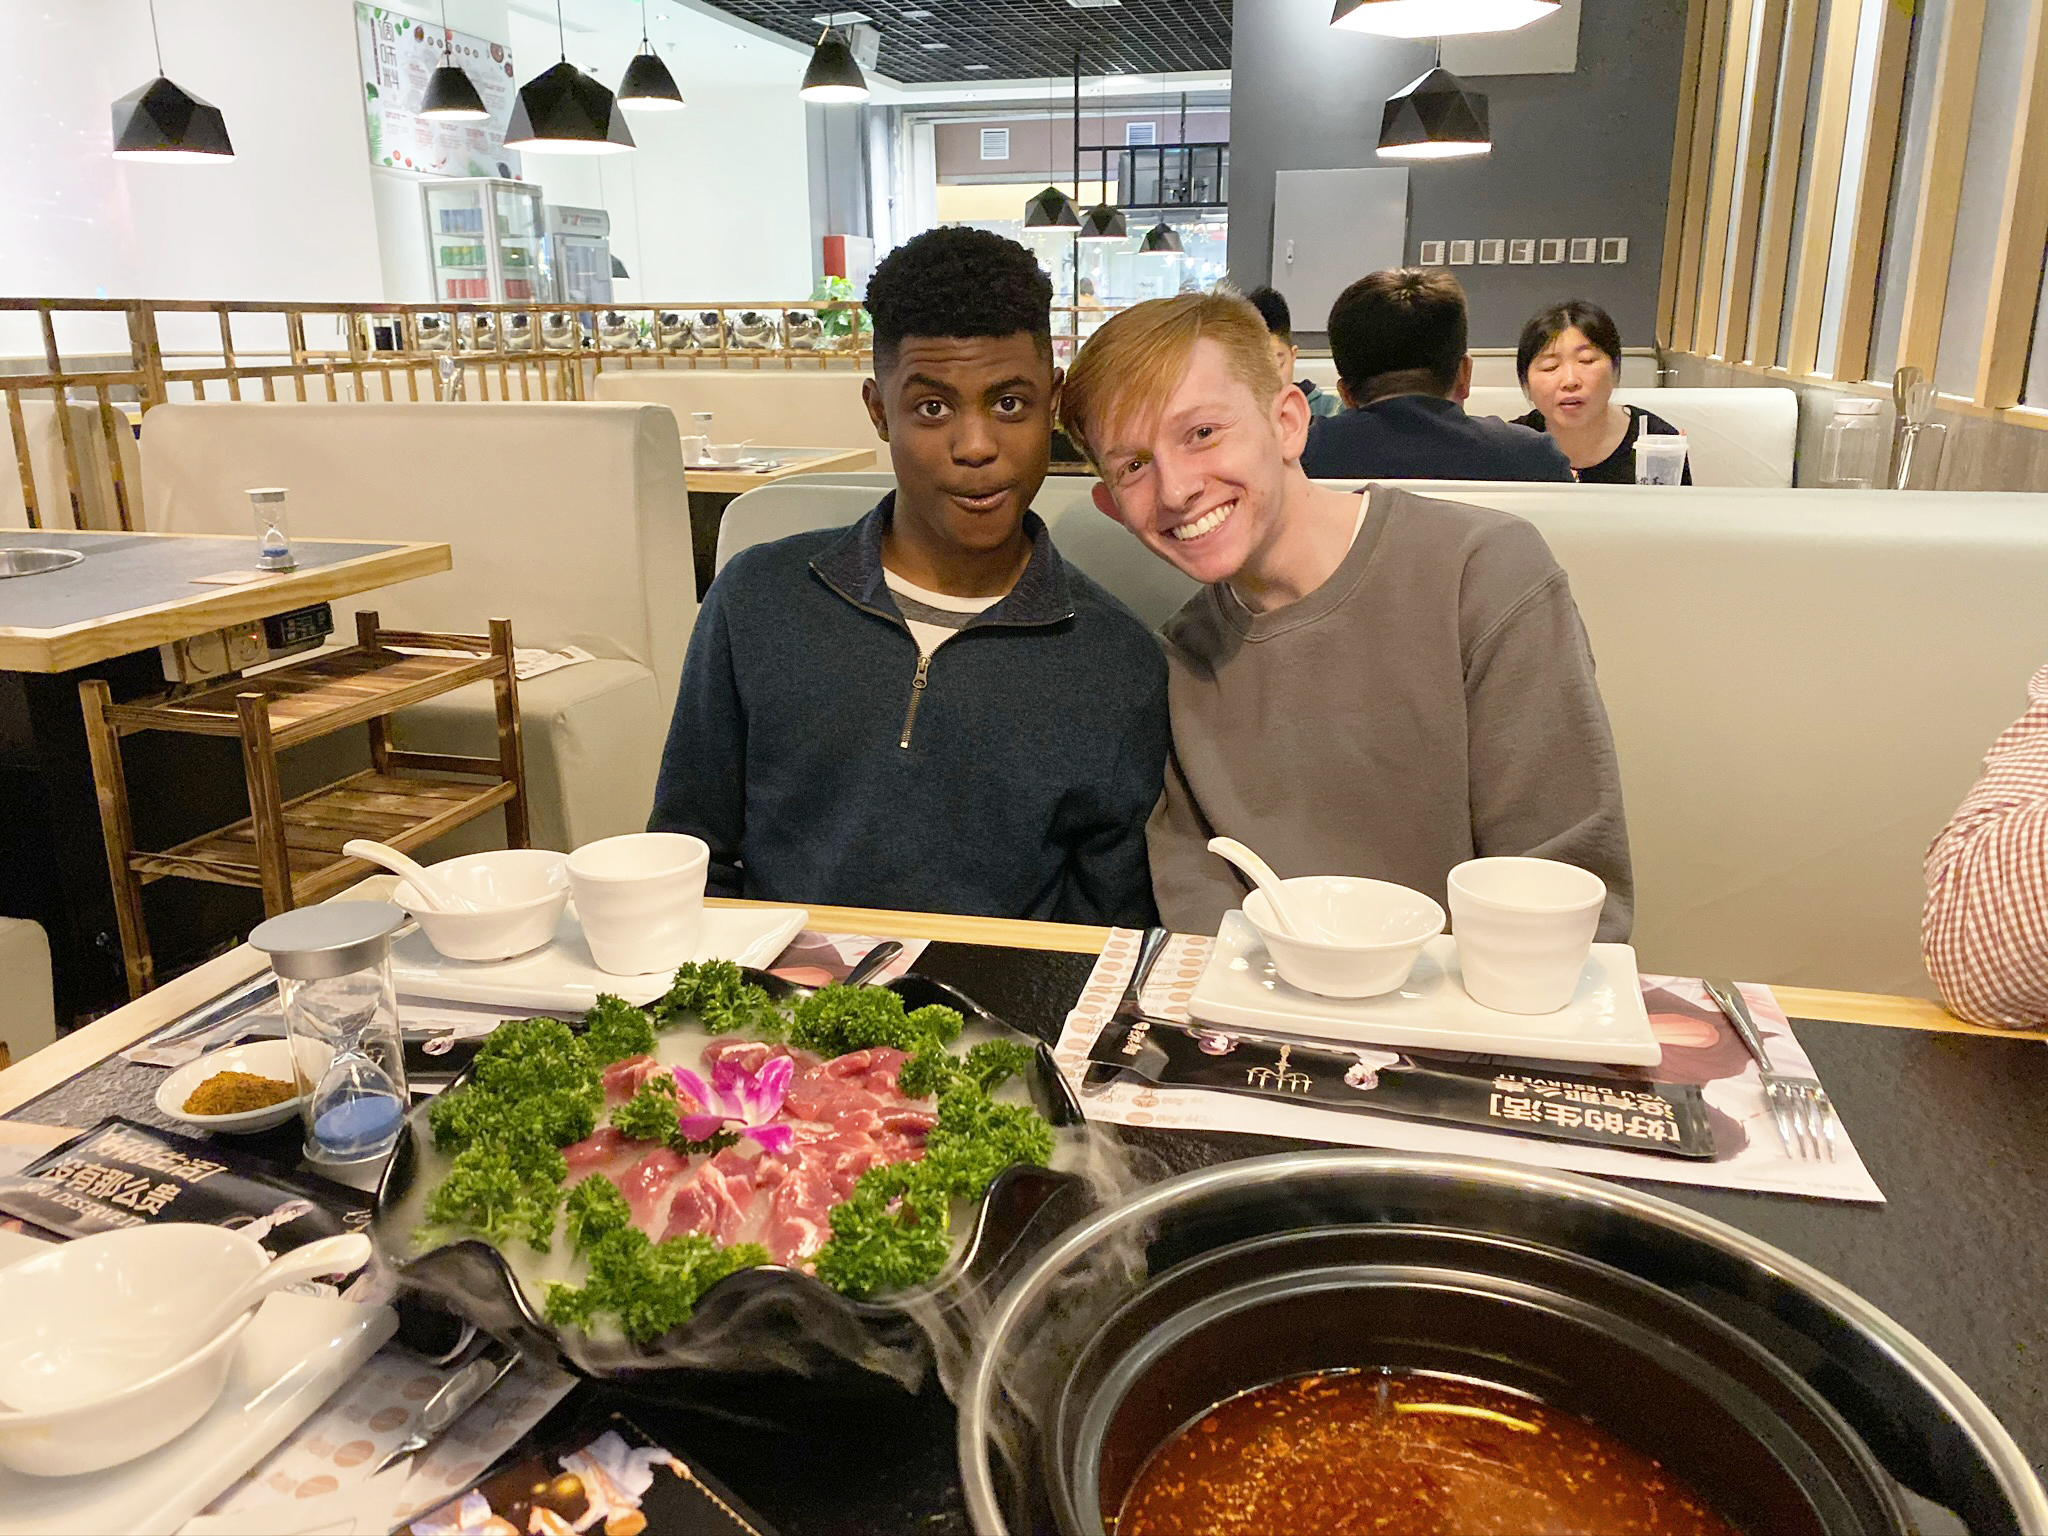 Hot pot for lunch! Photo credit: Valerie Kim